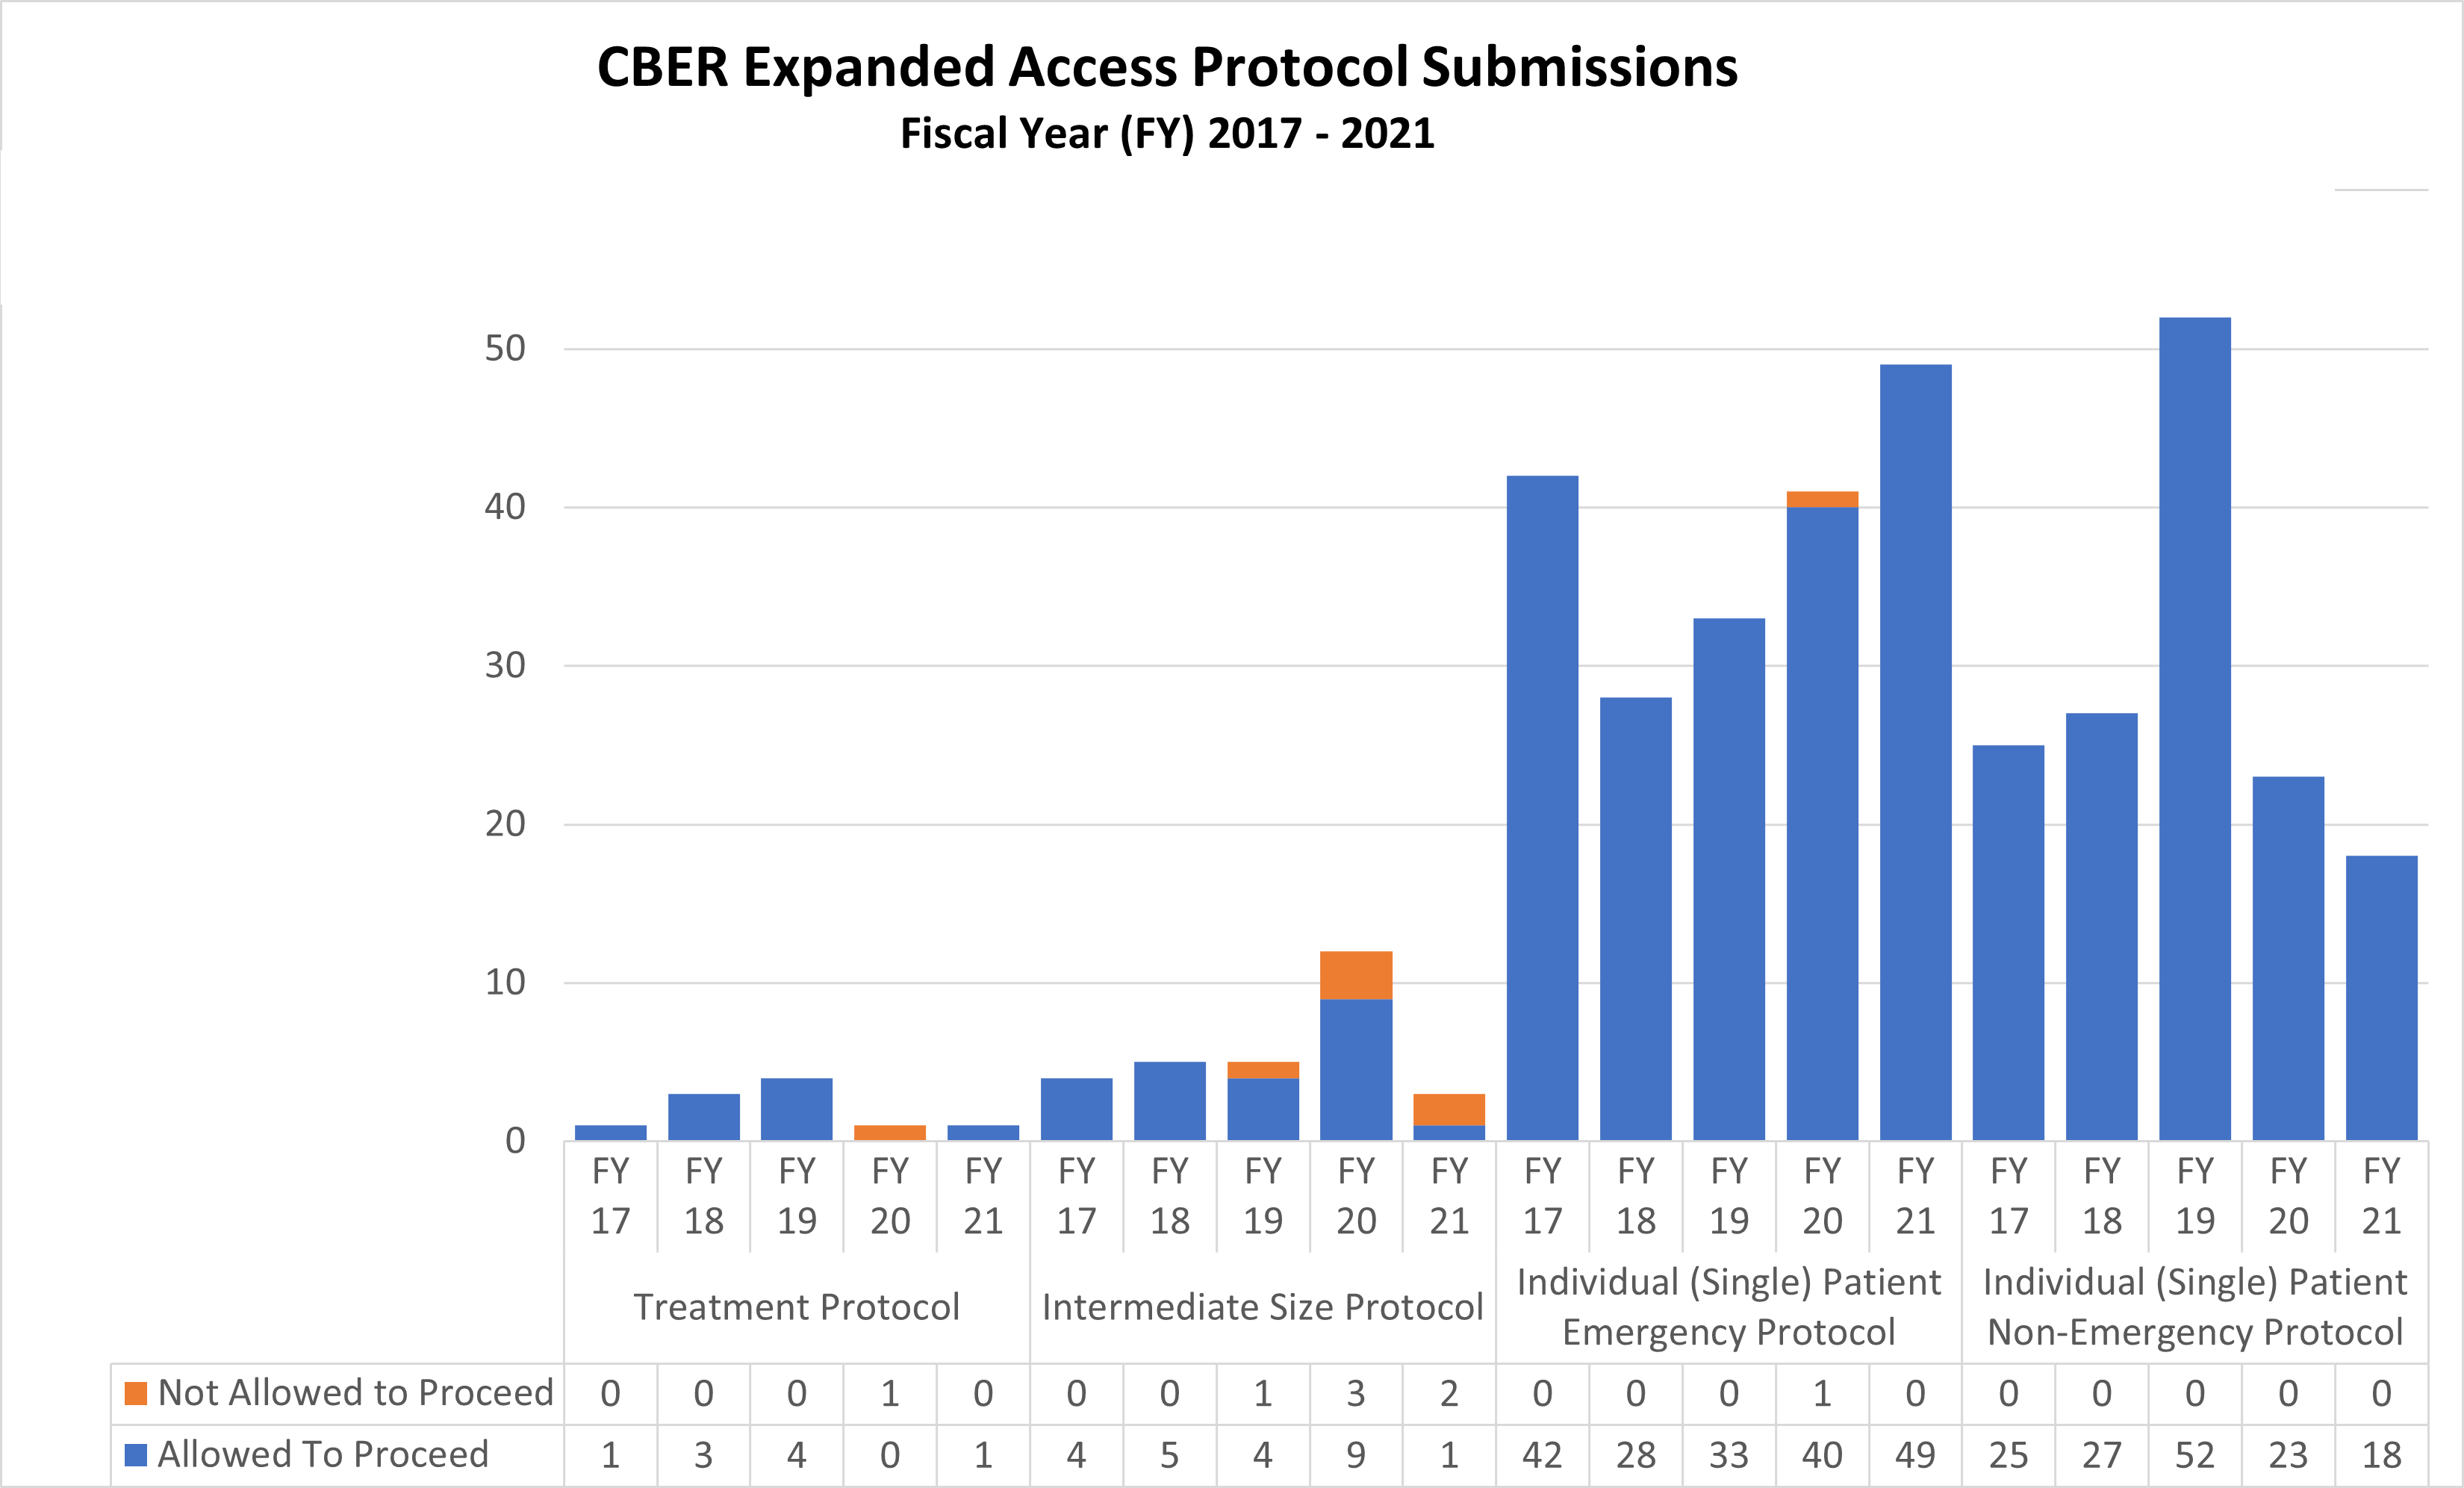 CBER Expanded Access Protocols (2017-2021)